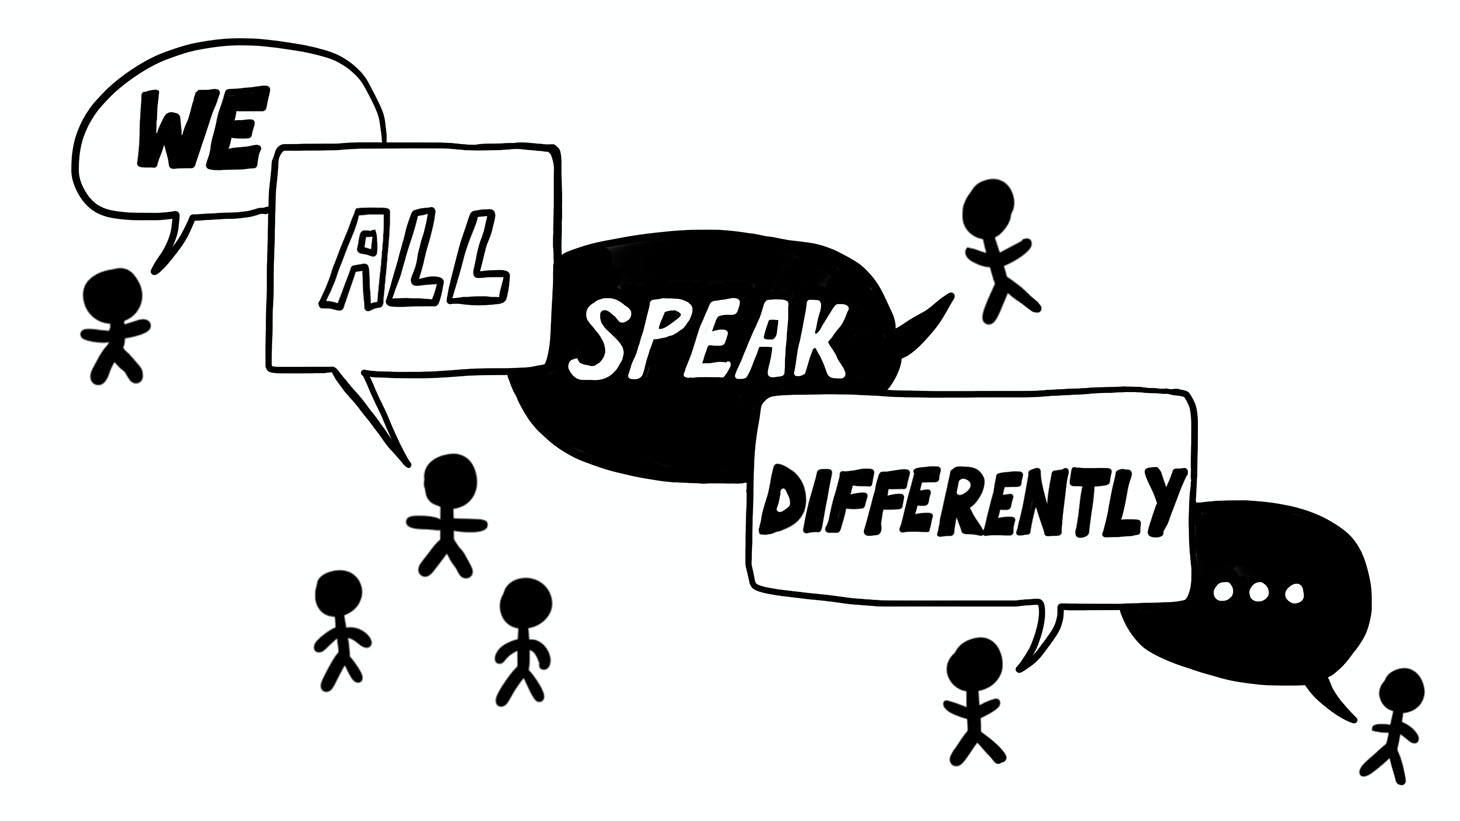 Illustration of people and speech bubbles talking to each other